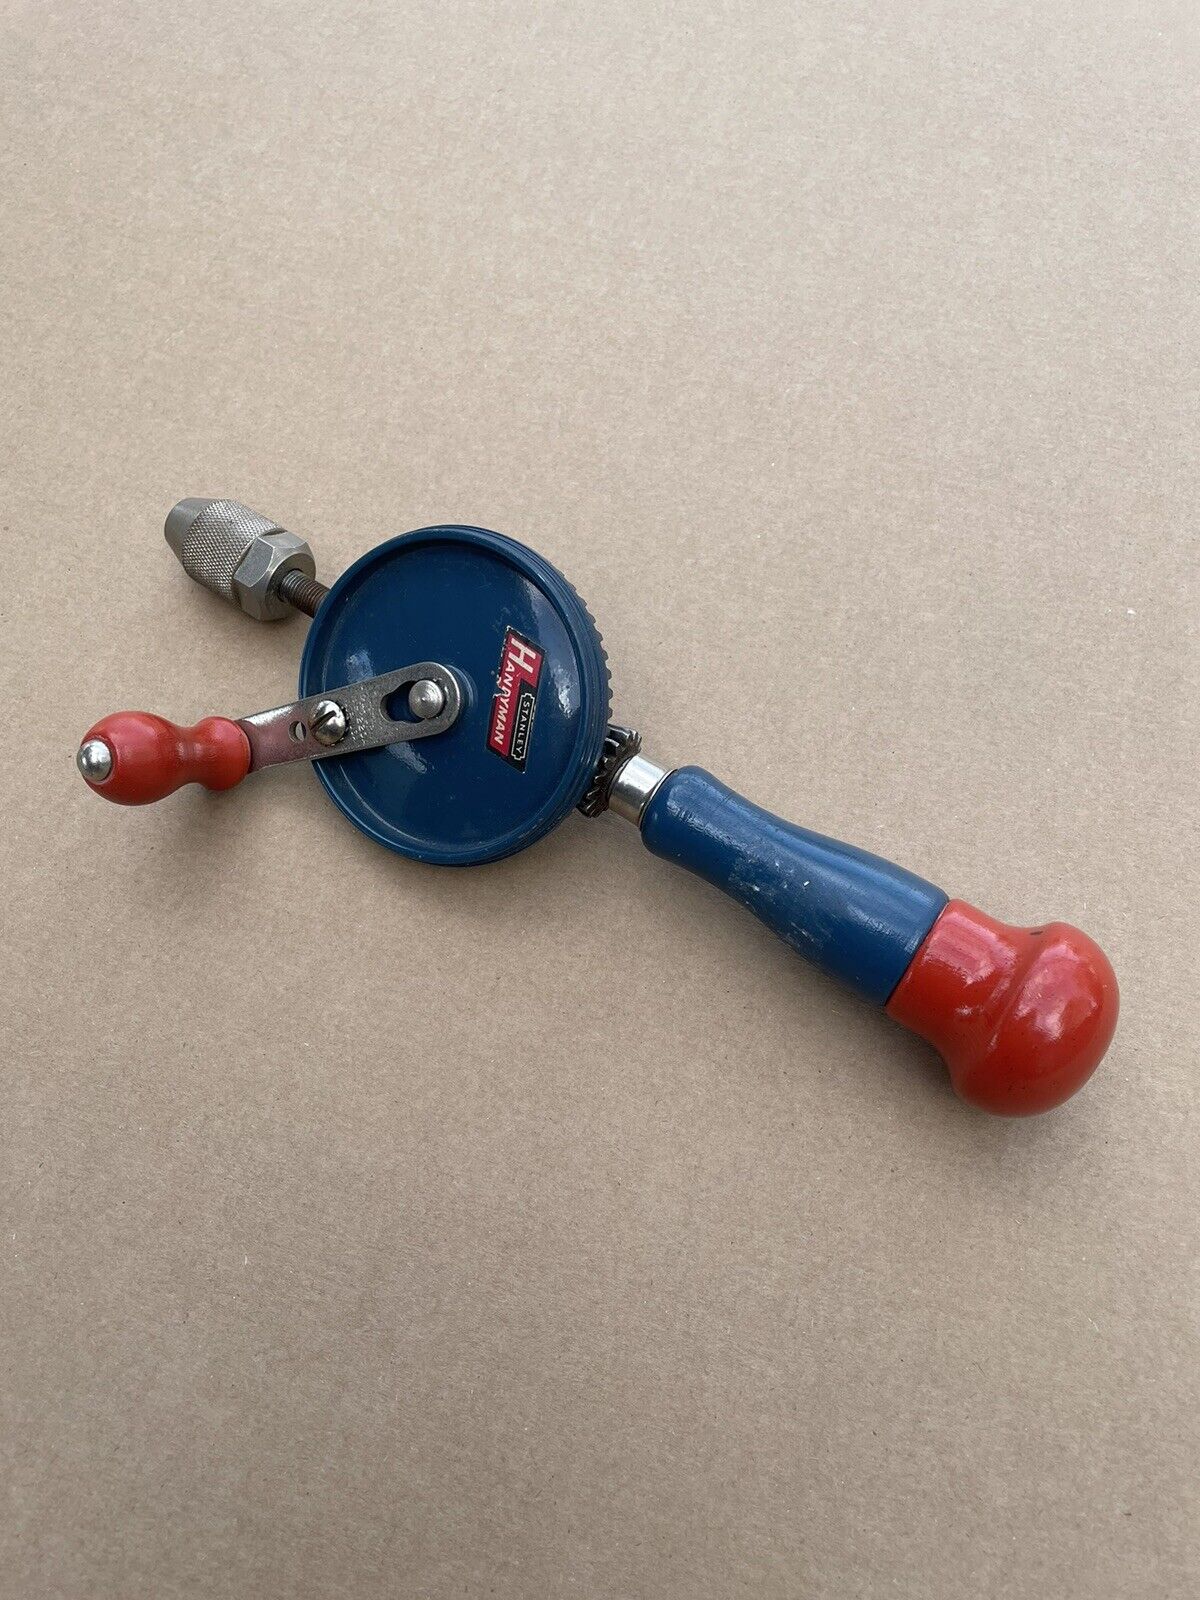 Vintage Stanley Handyman Eggbeater Drill Blue And Red USA With Bits H1220a Hy-Lo